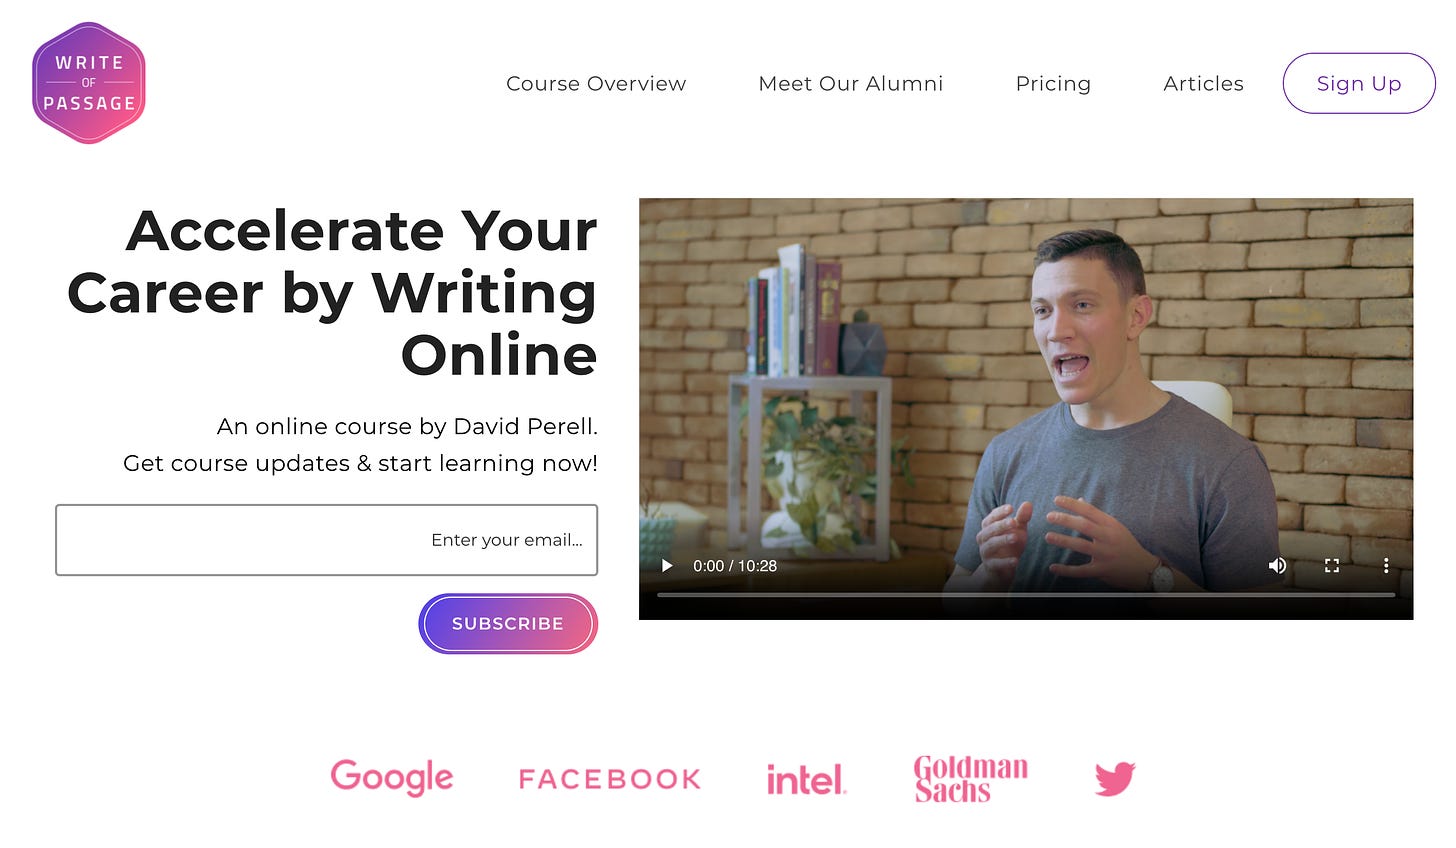 David Perell runs his own online course called Write of Passage